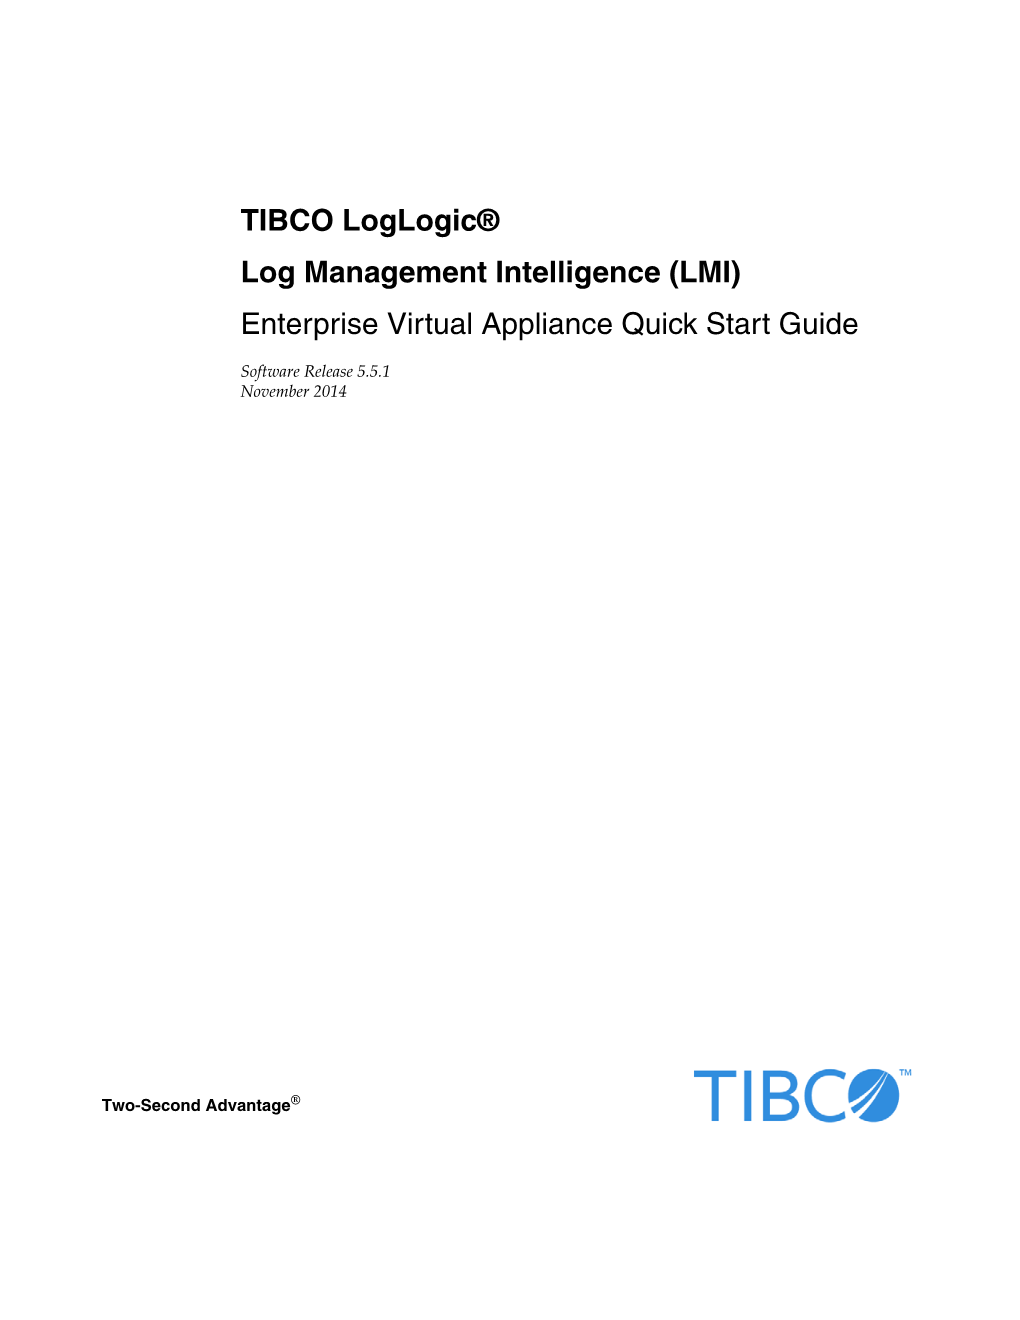 Loglogic Enterprise Virtual Appliance Quick Start Guide Provides Simple Instructions for Quickly Getting Started with the New Enterprise Virtual Appliance